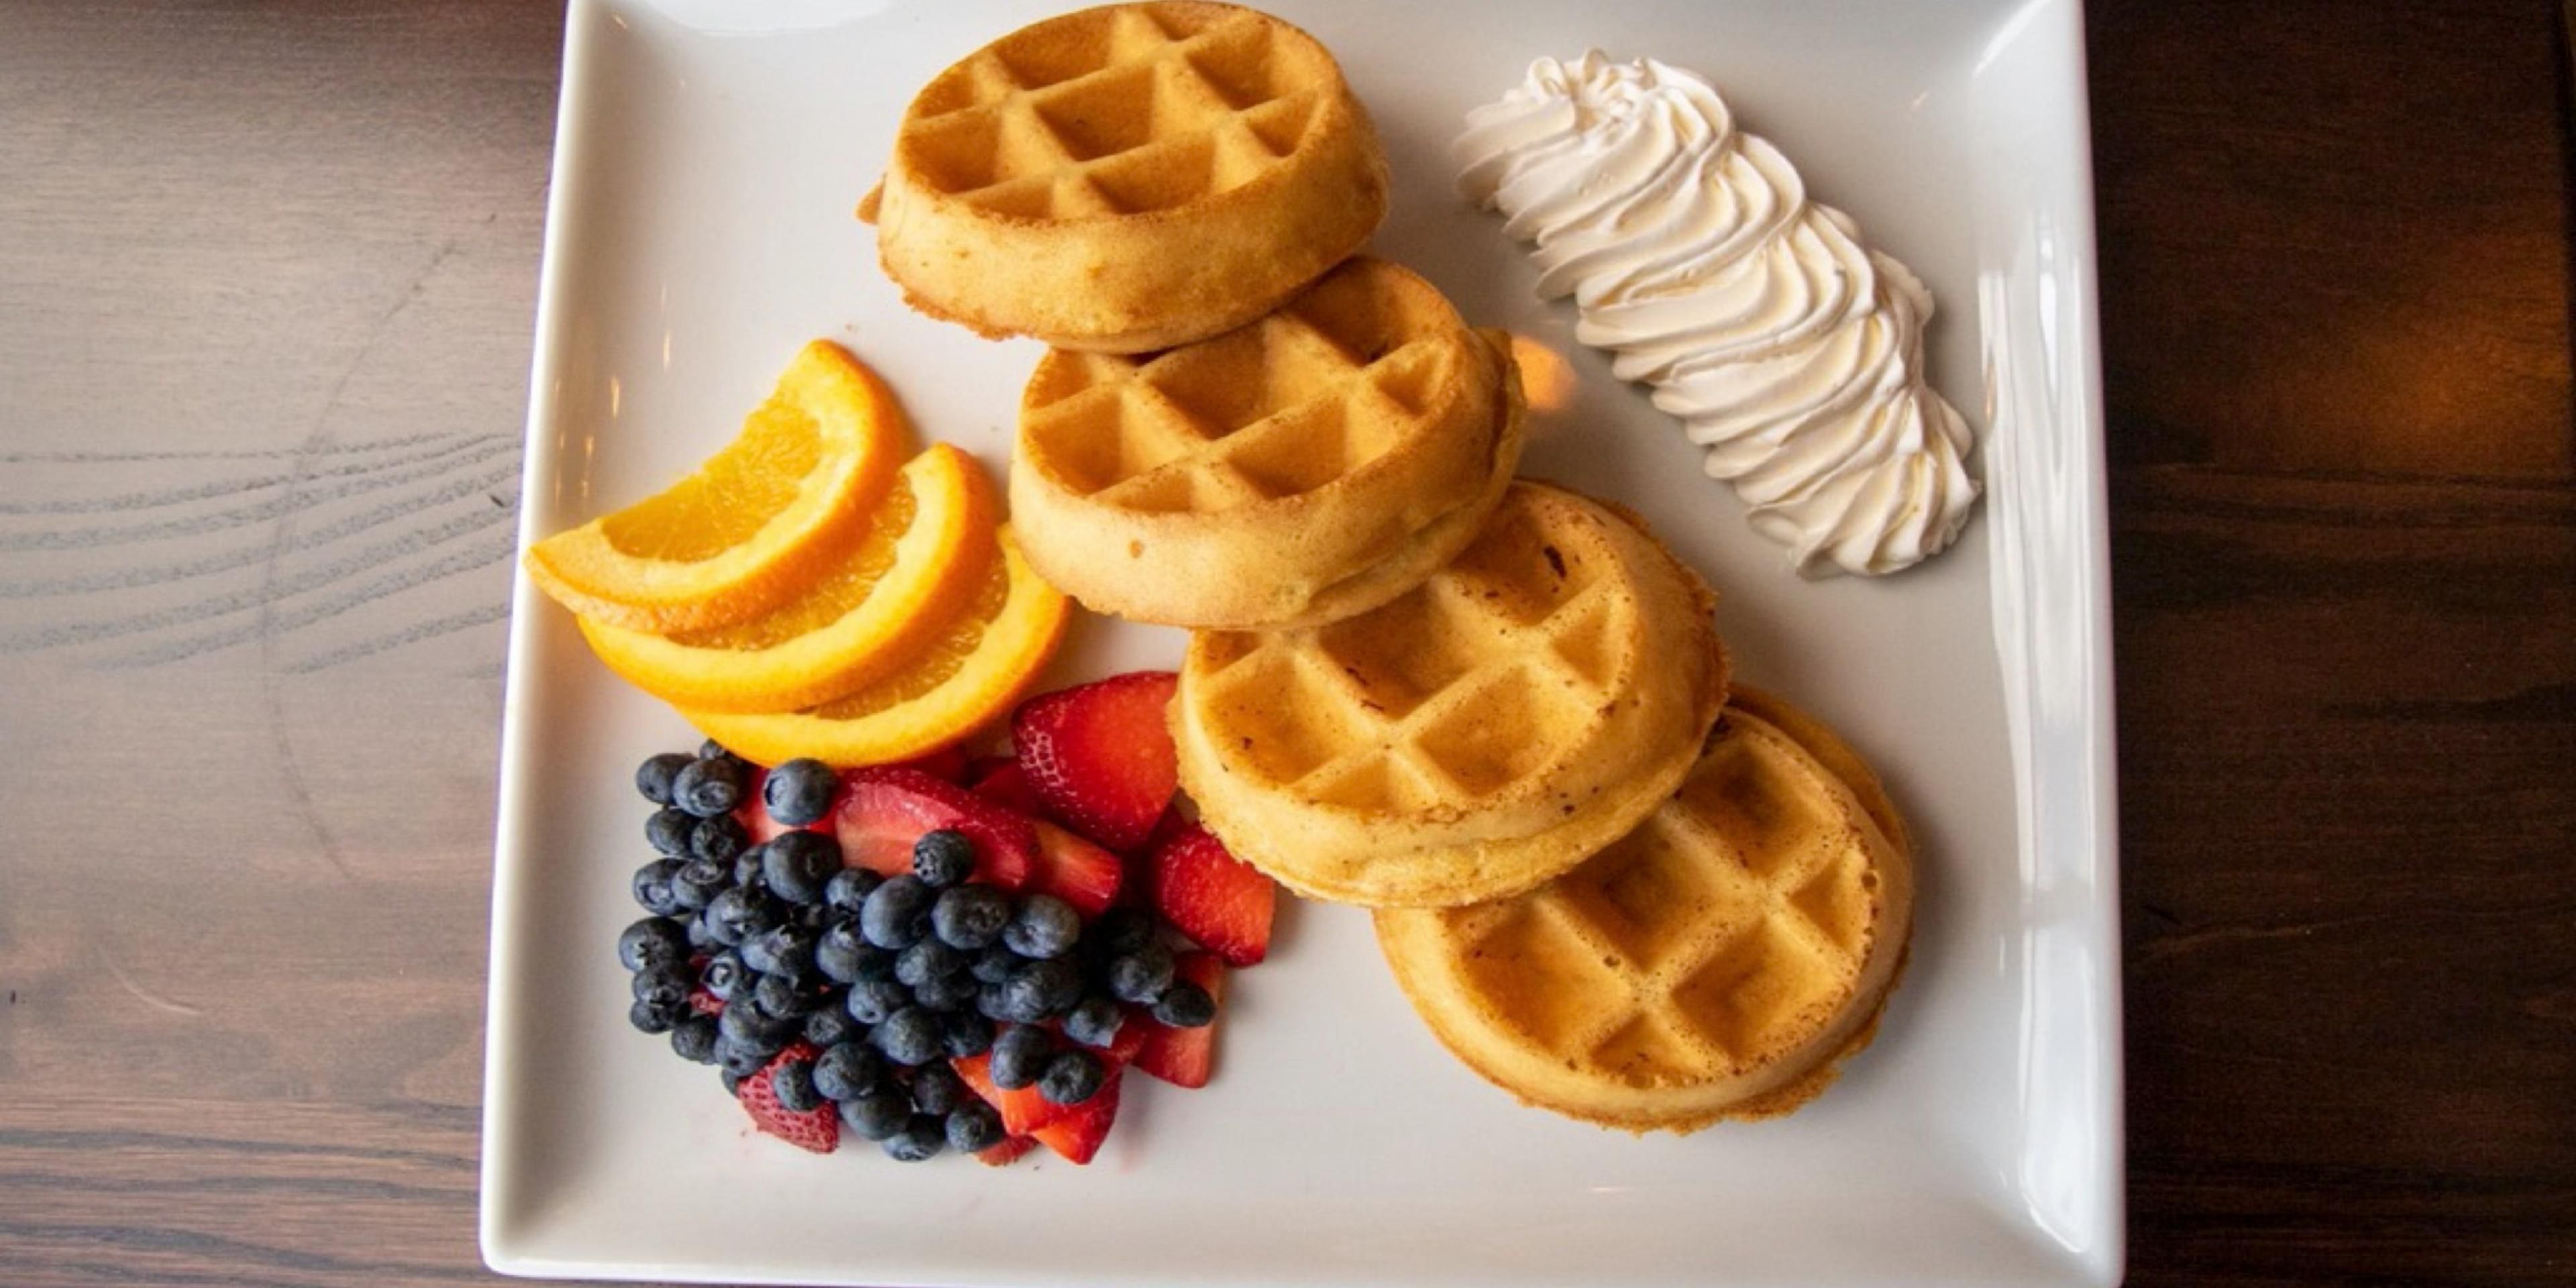 Waffles and fruit with whipped cream